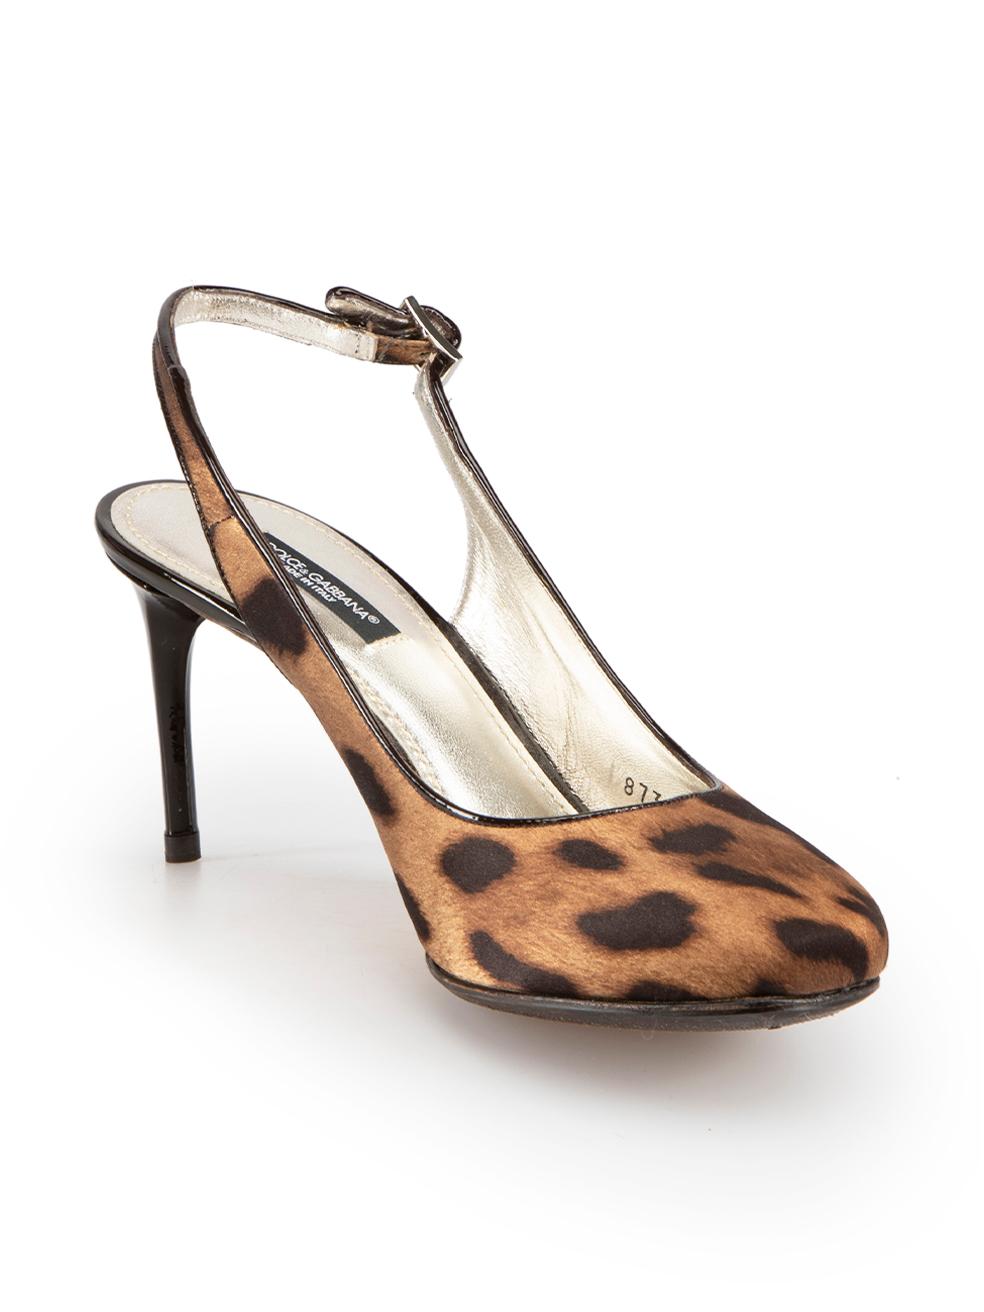 CONDITION is Very good. Hardly any visible wear to shoes is evident on this used Dolce & Gabbana designer resale item. These shoes come with original box and have been partially re-soled.
 
 Details
 Brown
 Satin
 Heels
 Leopard print
 Round toe
